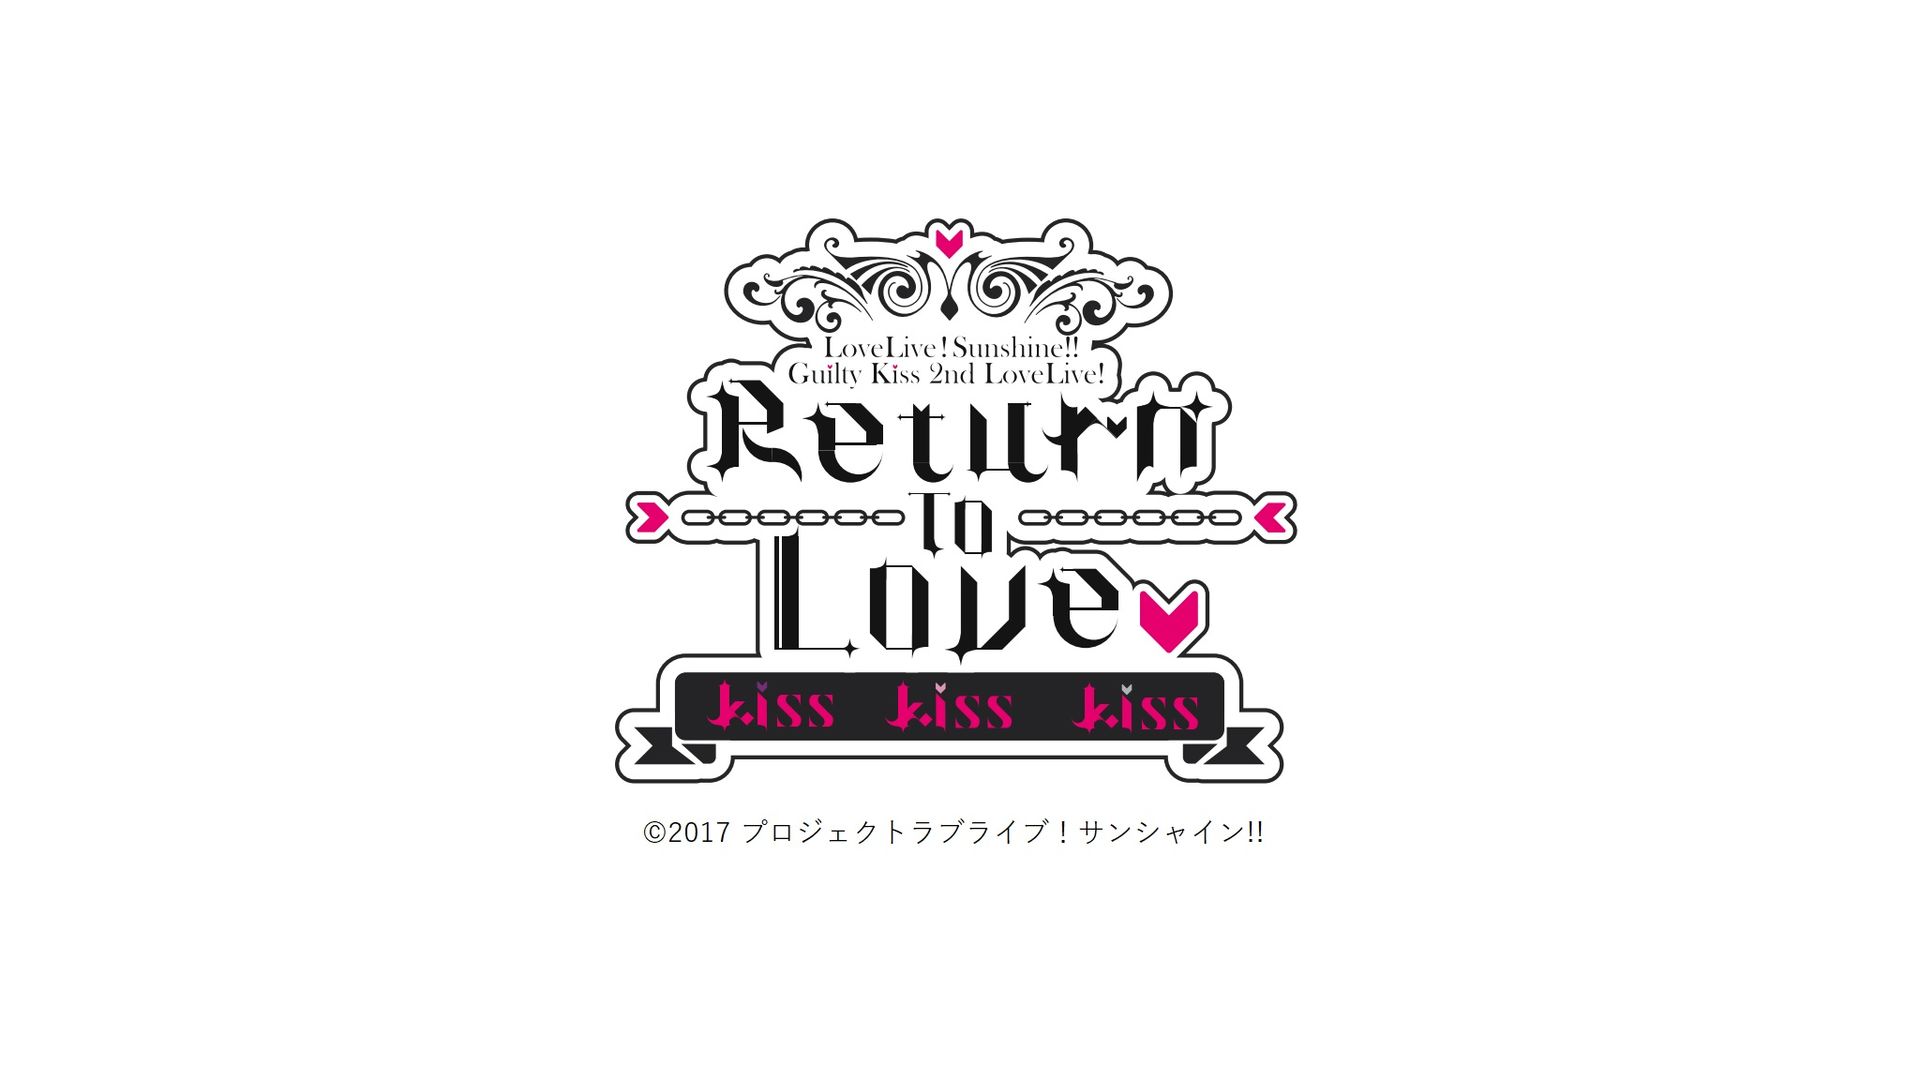 [Streaming+] Love Live! Sunshine!! Guilty Kiss 2nd LoveLive! ～Return To Love ♡ Kiss Kiss Kiss～Day.2 【with audio commentary by Guilty Kiss】[Go To Event]